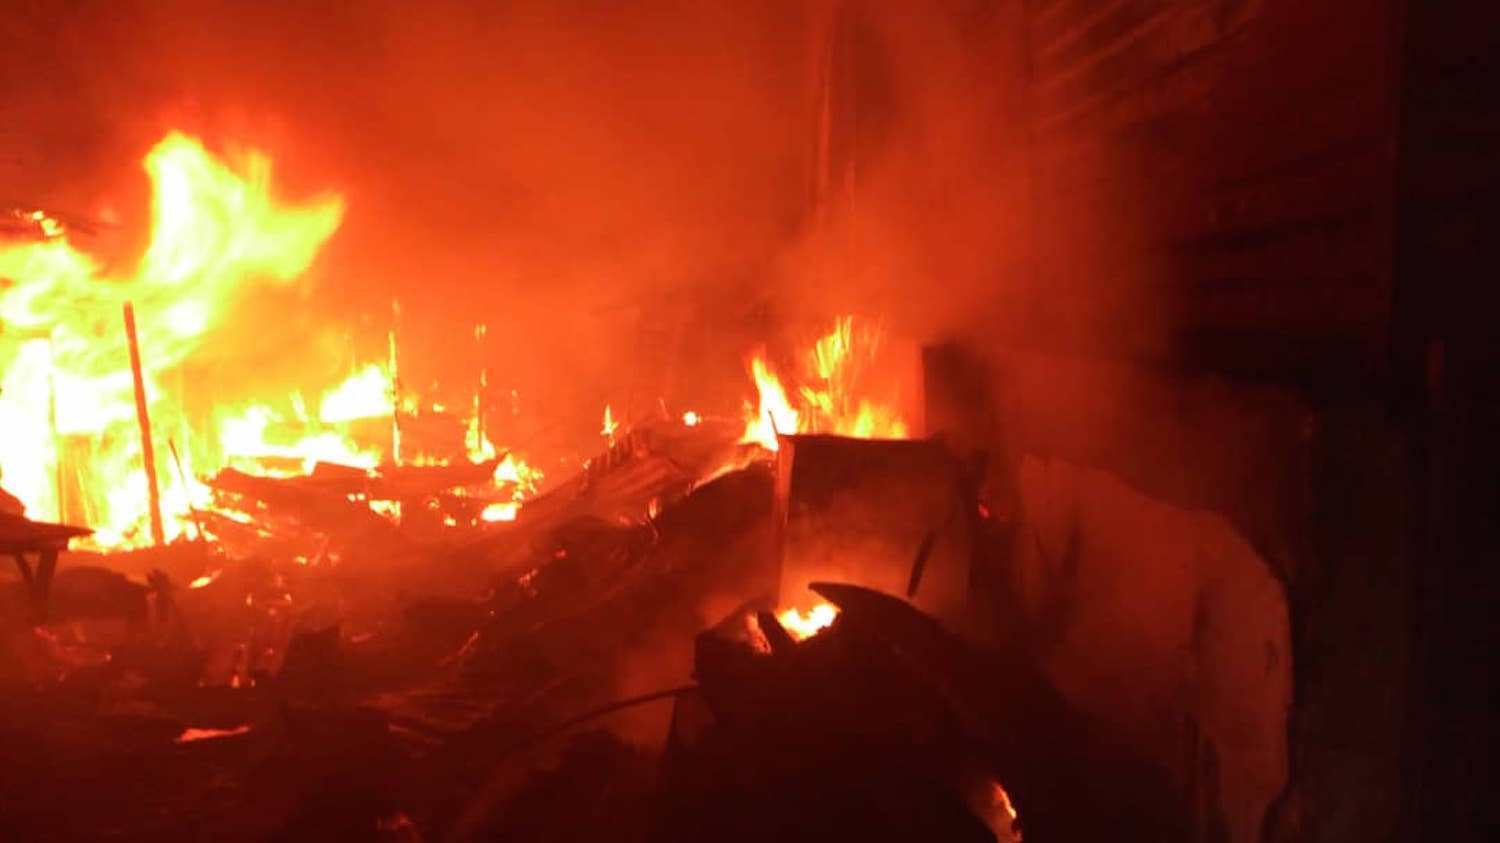 However, the Head of Operations of the FCT Fire Service, Amiola Adebayo, confirmed that the incident was indeed caused by an electrical power surge at the ICT section of the building and that officers of the Fire Service had succeeded in putting out the fire.